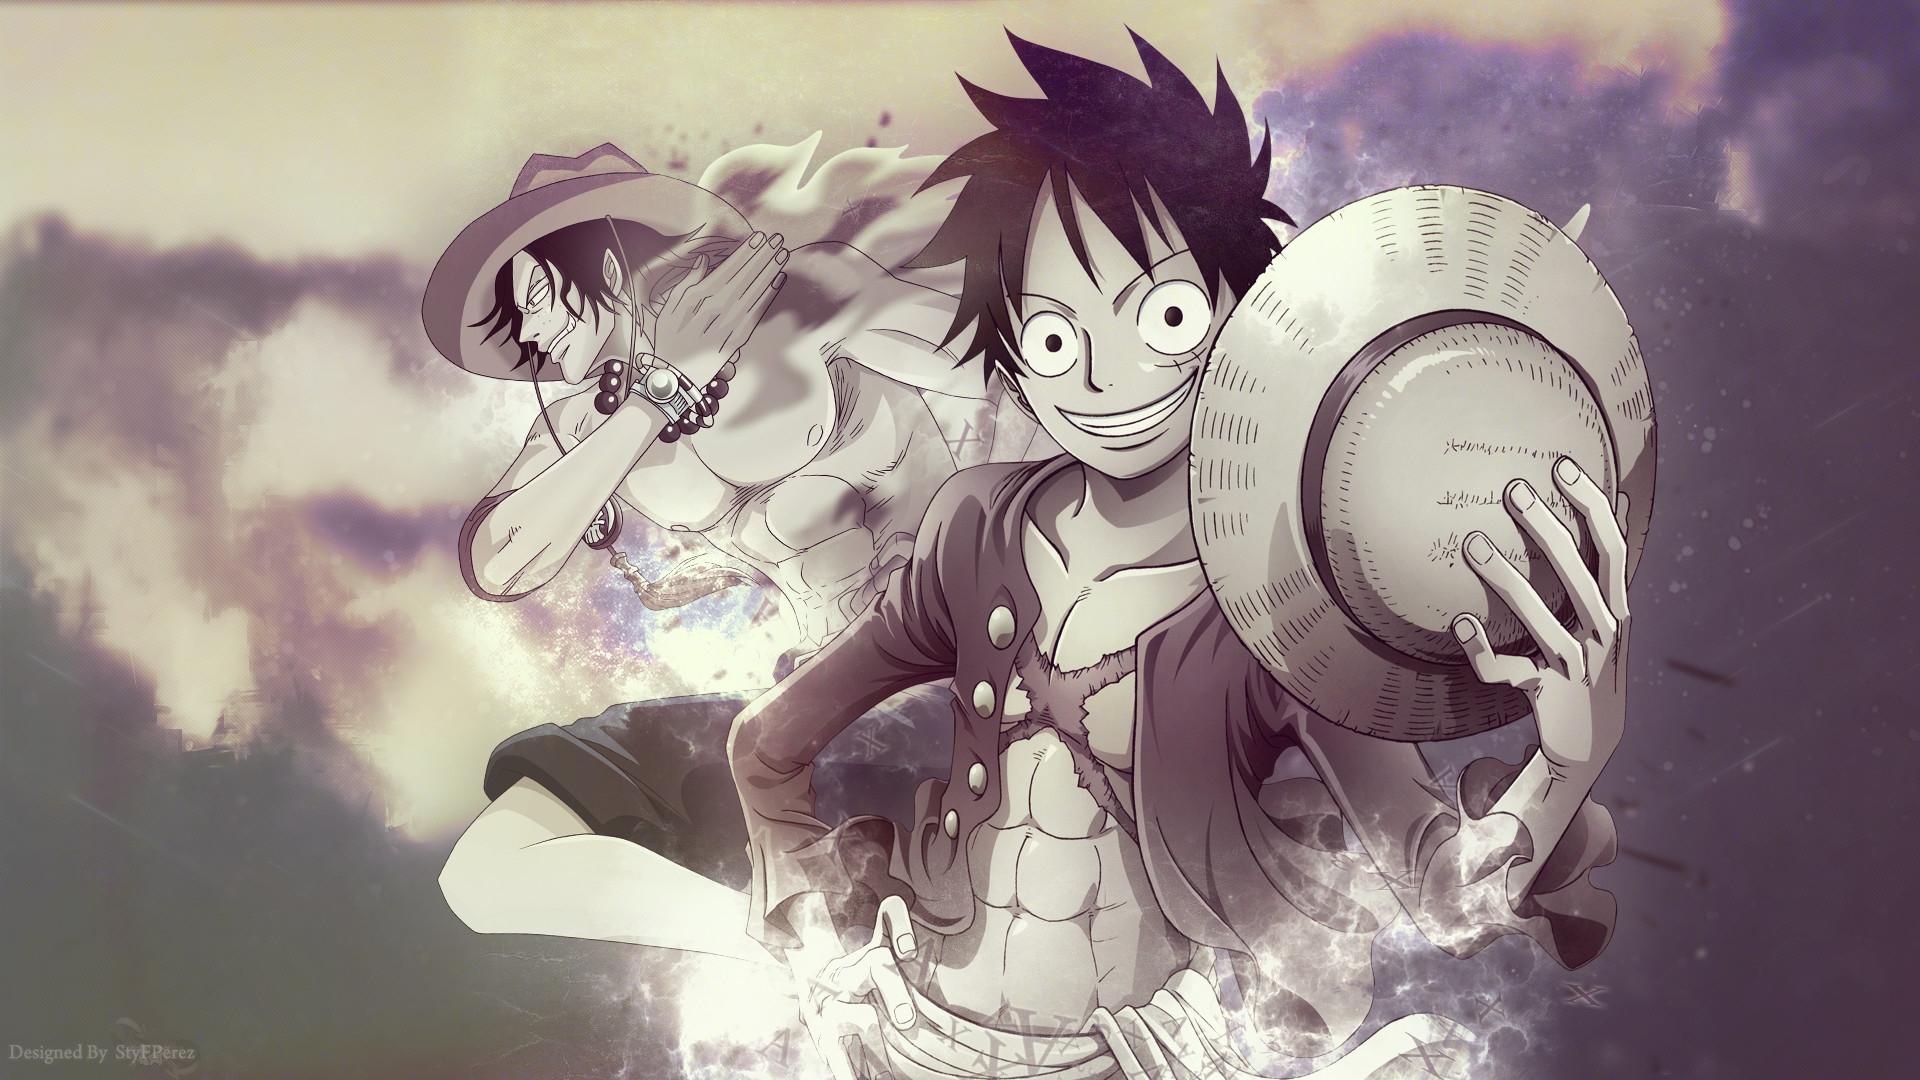 Luffy Sabo Ace Wallpaper and Background Image  1625x1030  ID673536   Wallpaper Abyss  Android wallpaper anime Background images wallpapers  Anime wallpaper